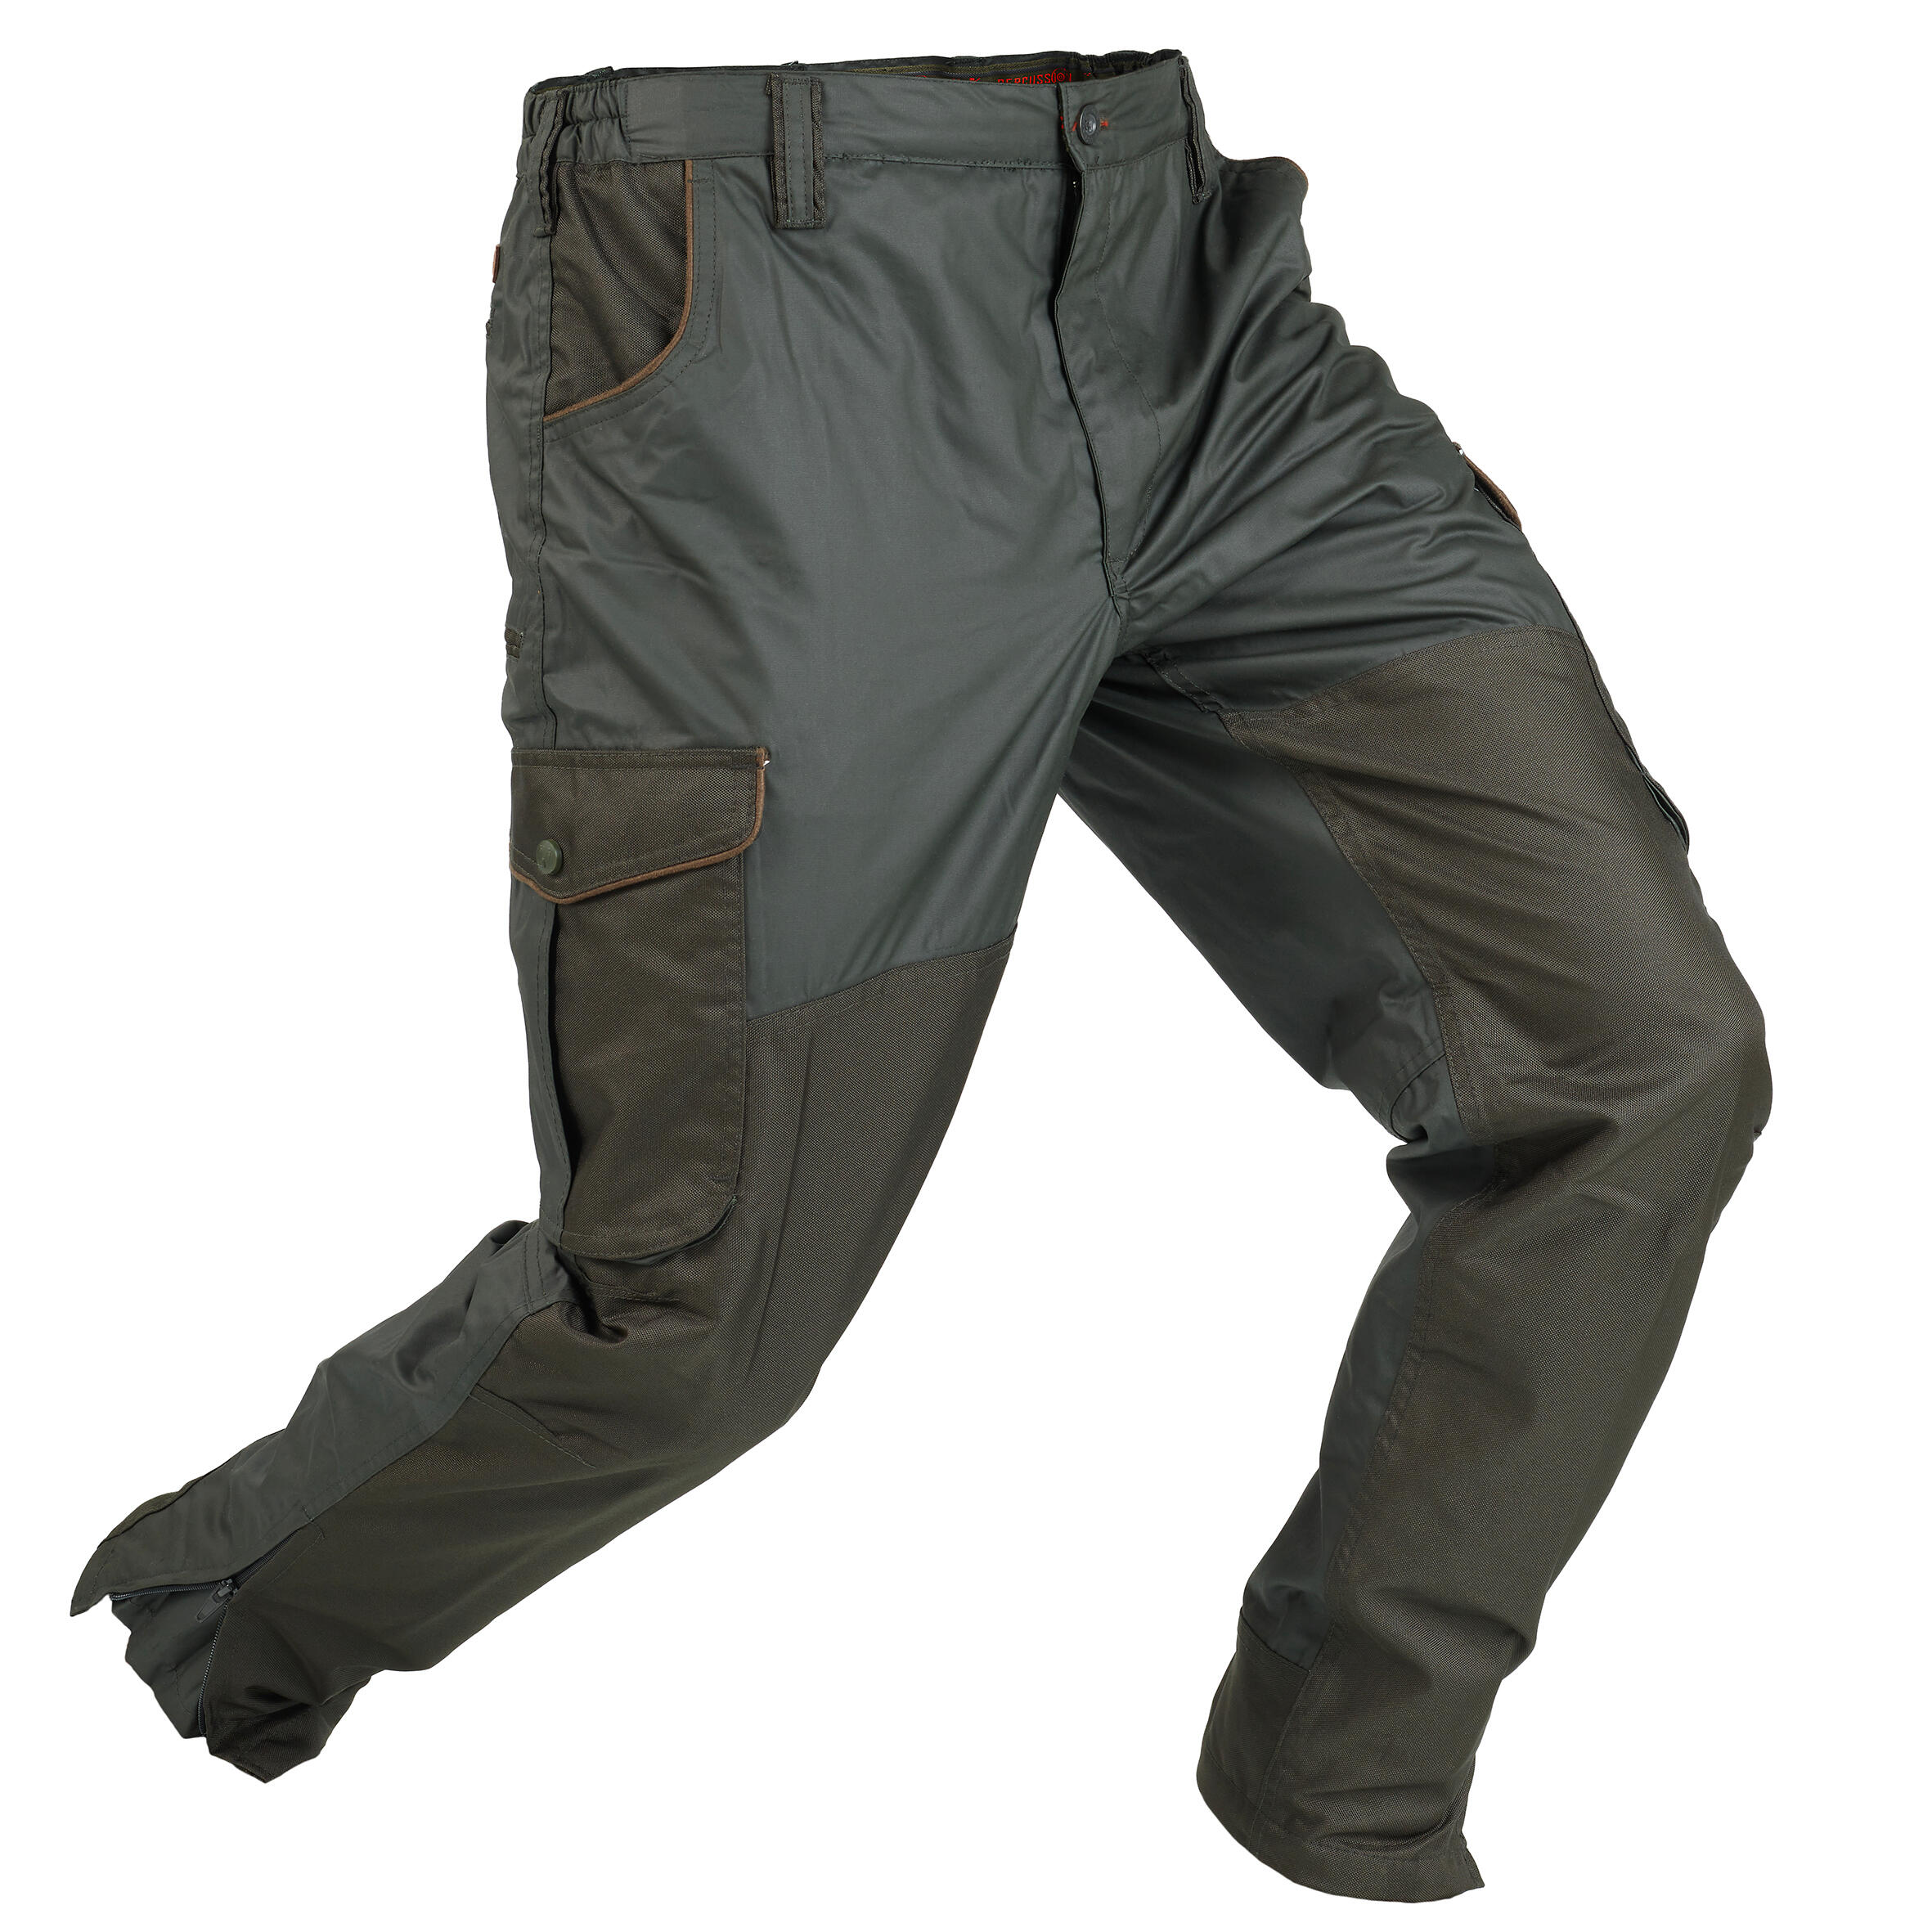 Impertane Tapered Country Sport Trousers - Green 2/14